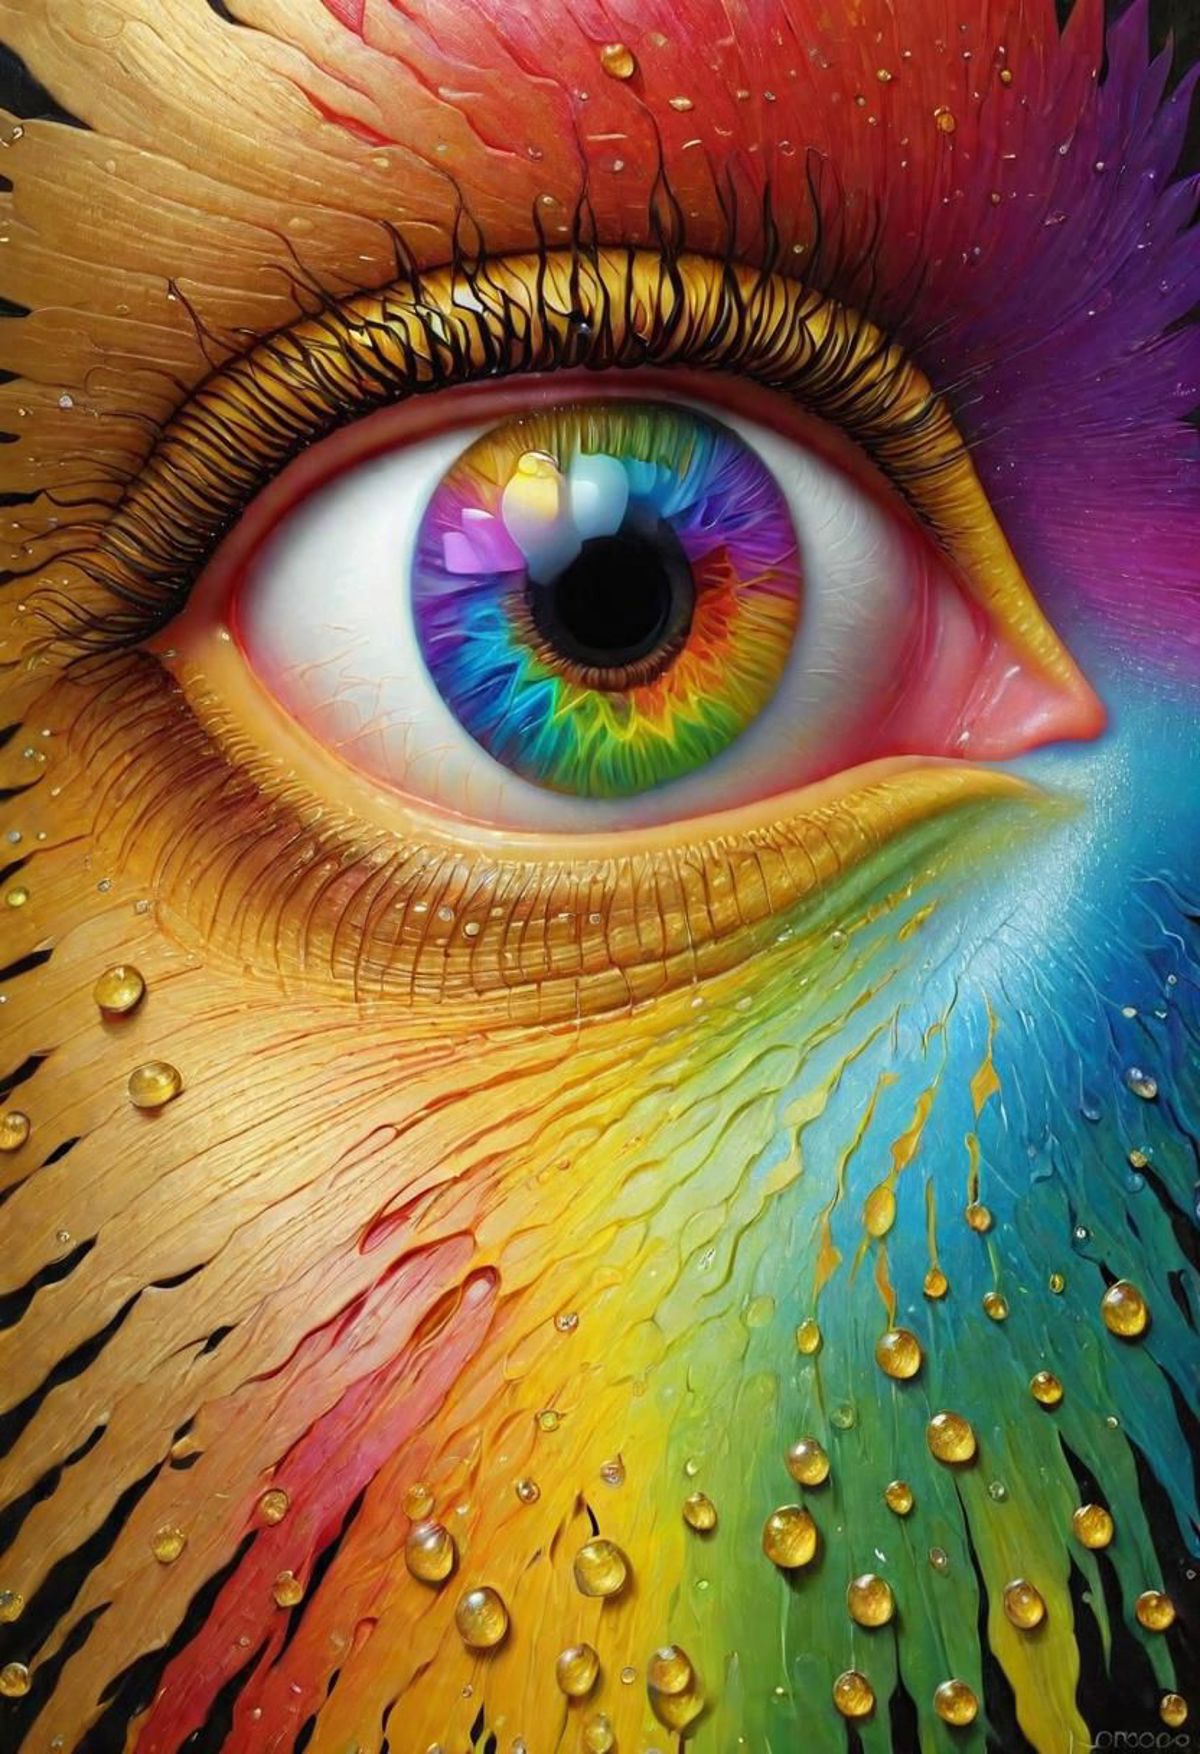 eyeart image by bubblebunny